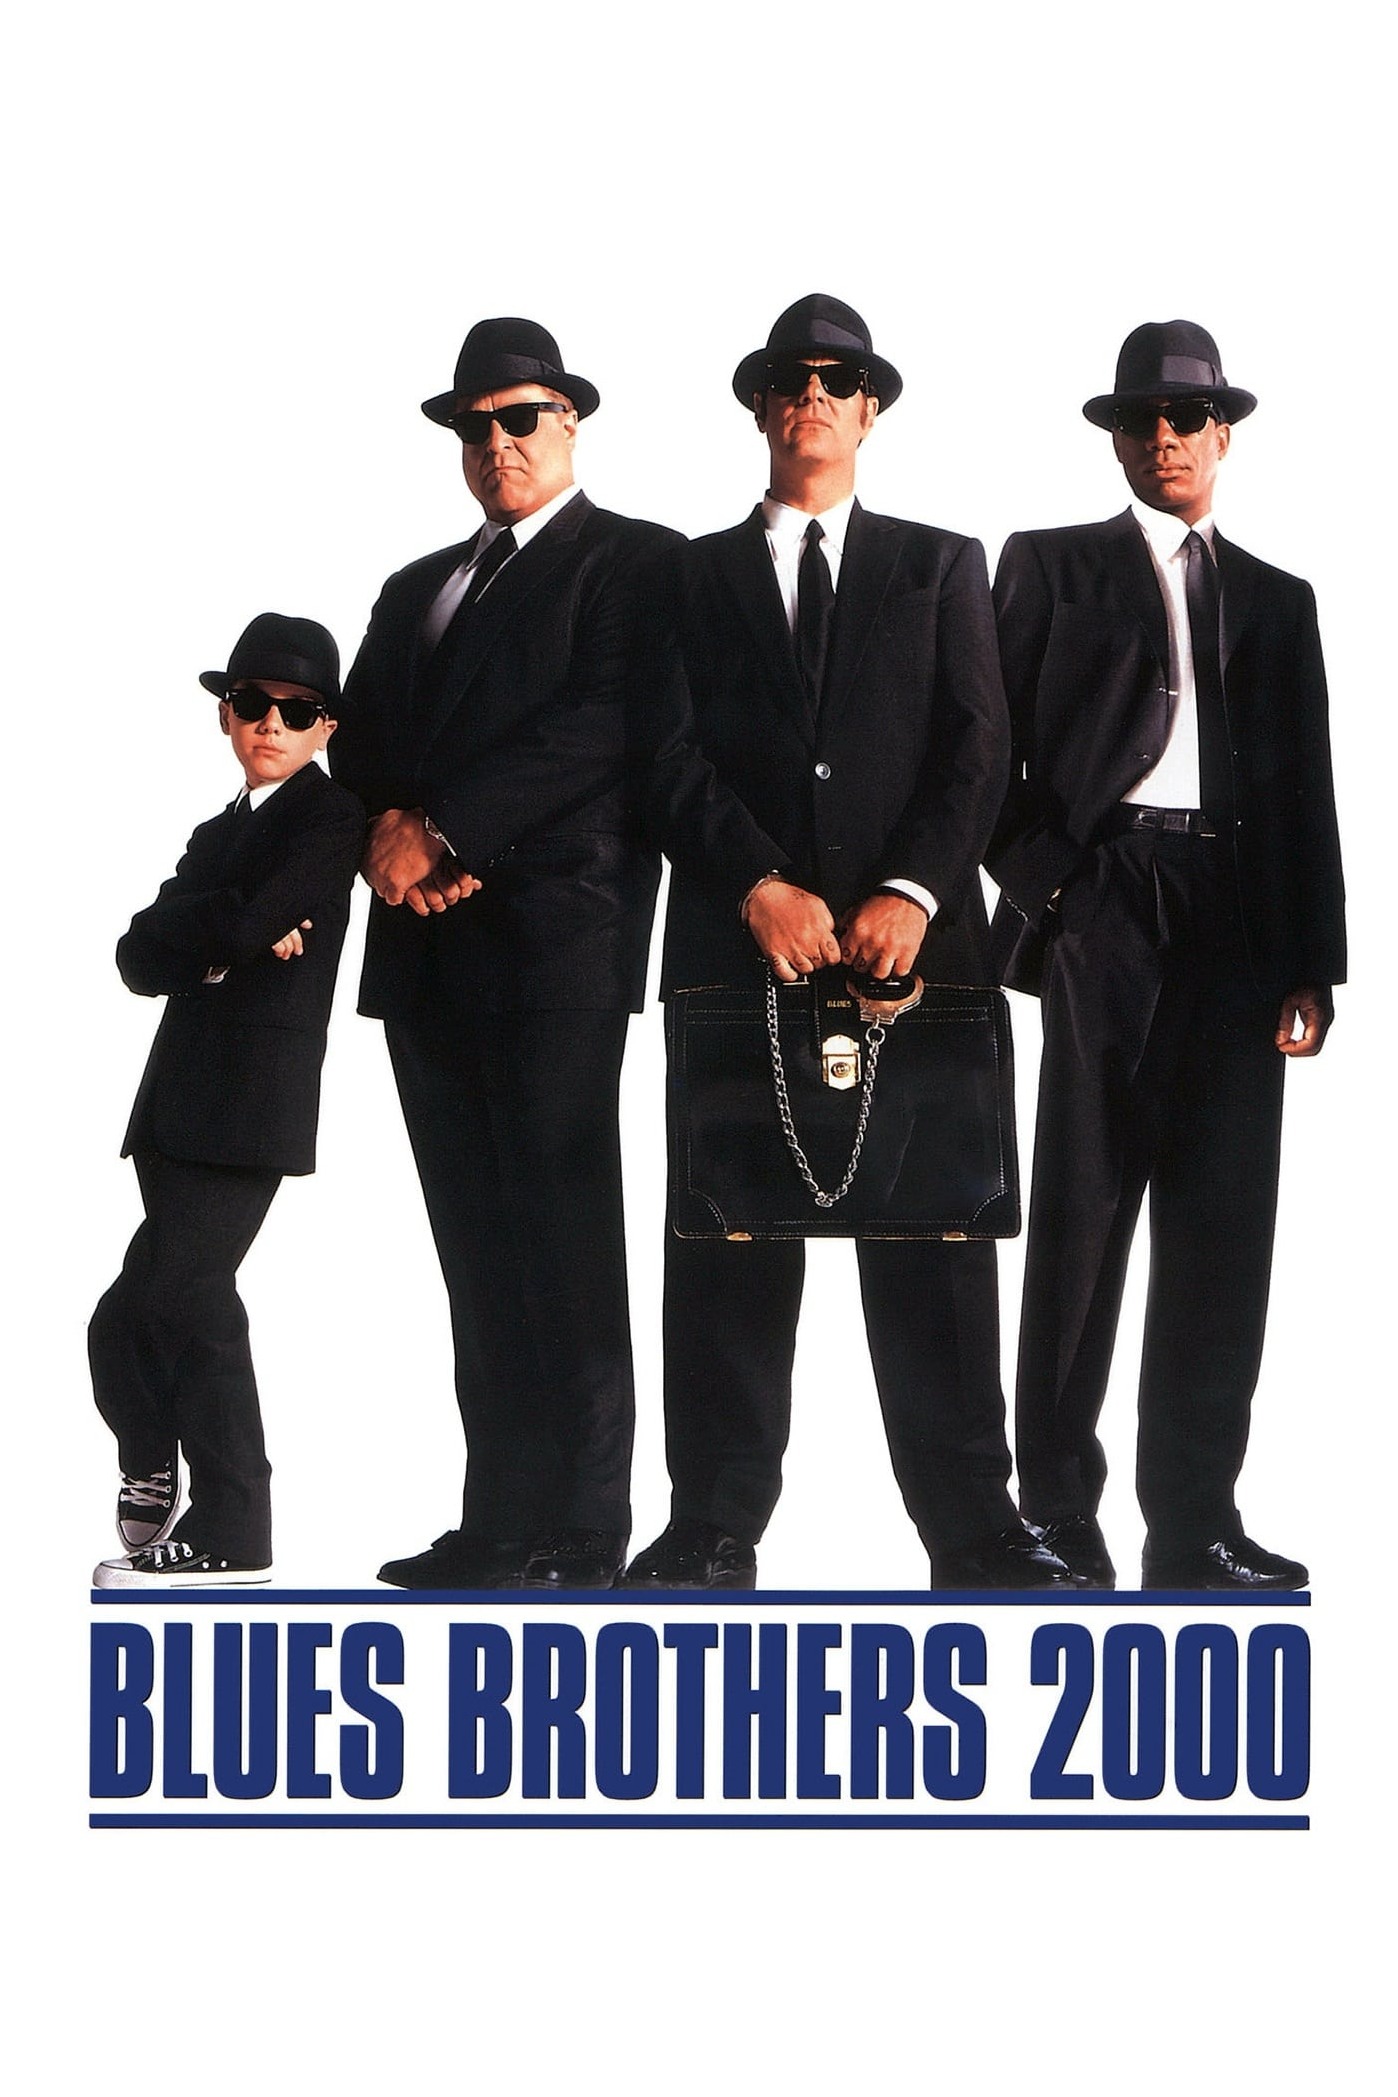 Blues Brothers 2000 - Where to Watch and Stream - TV Guide